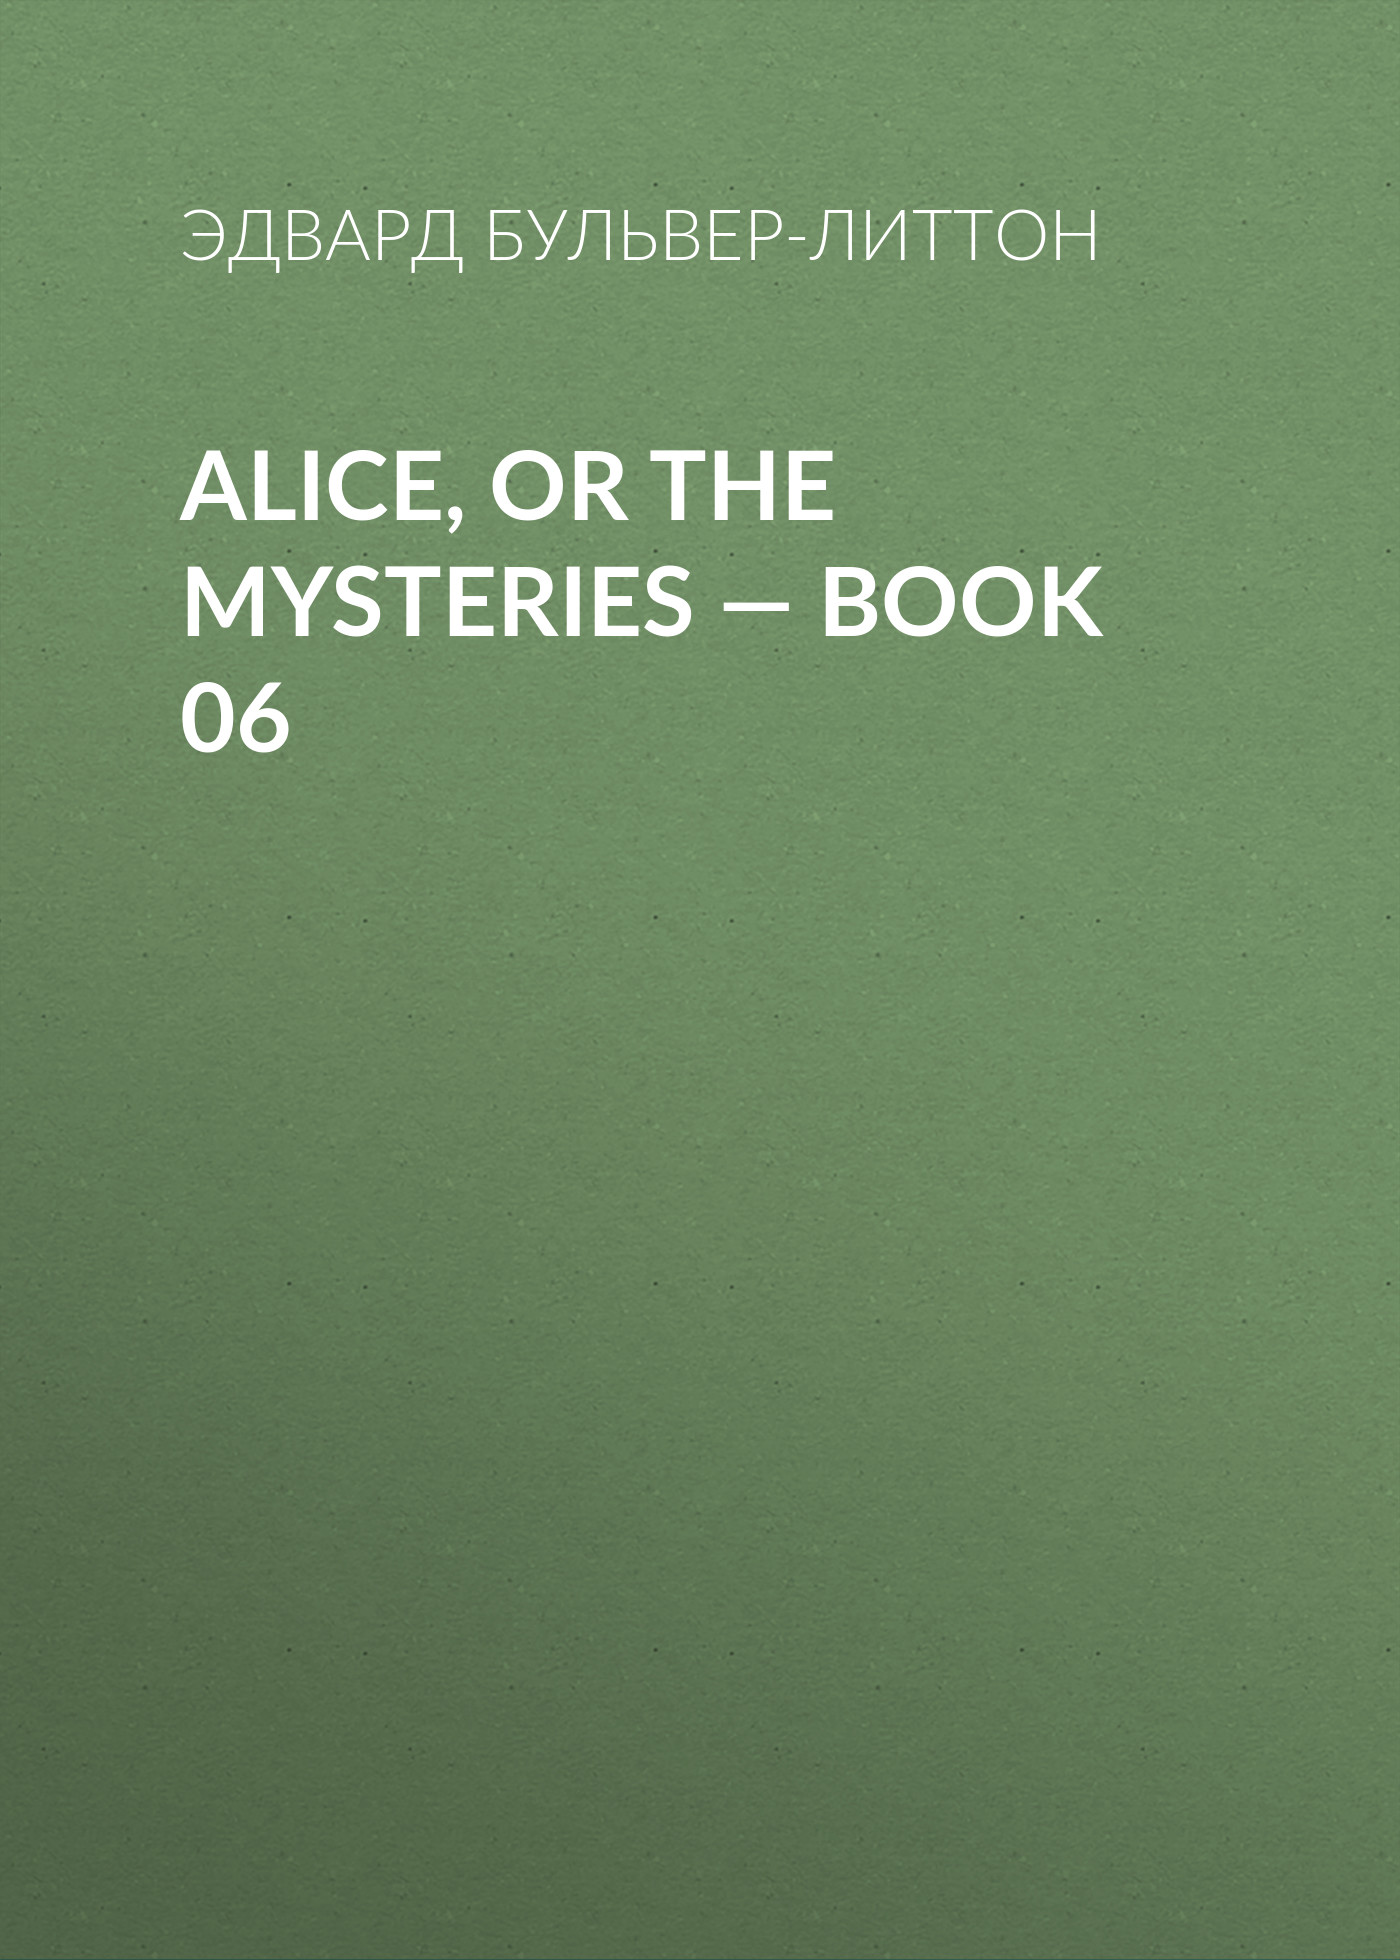 Alice, or the Mysteries— Book 06